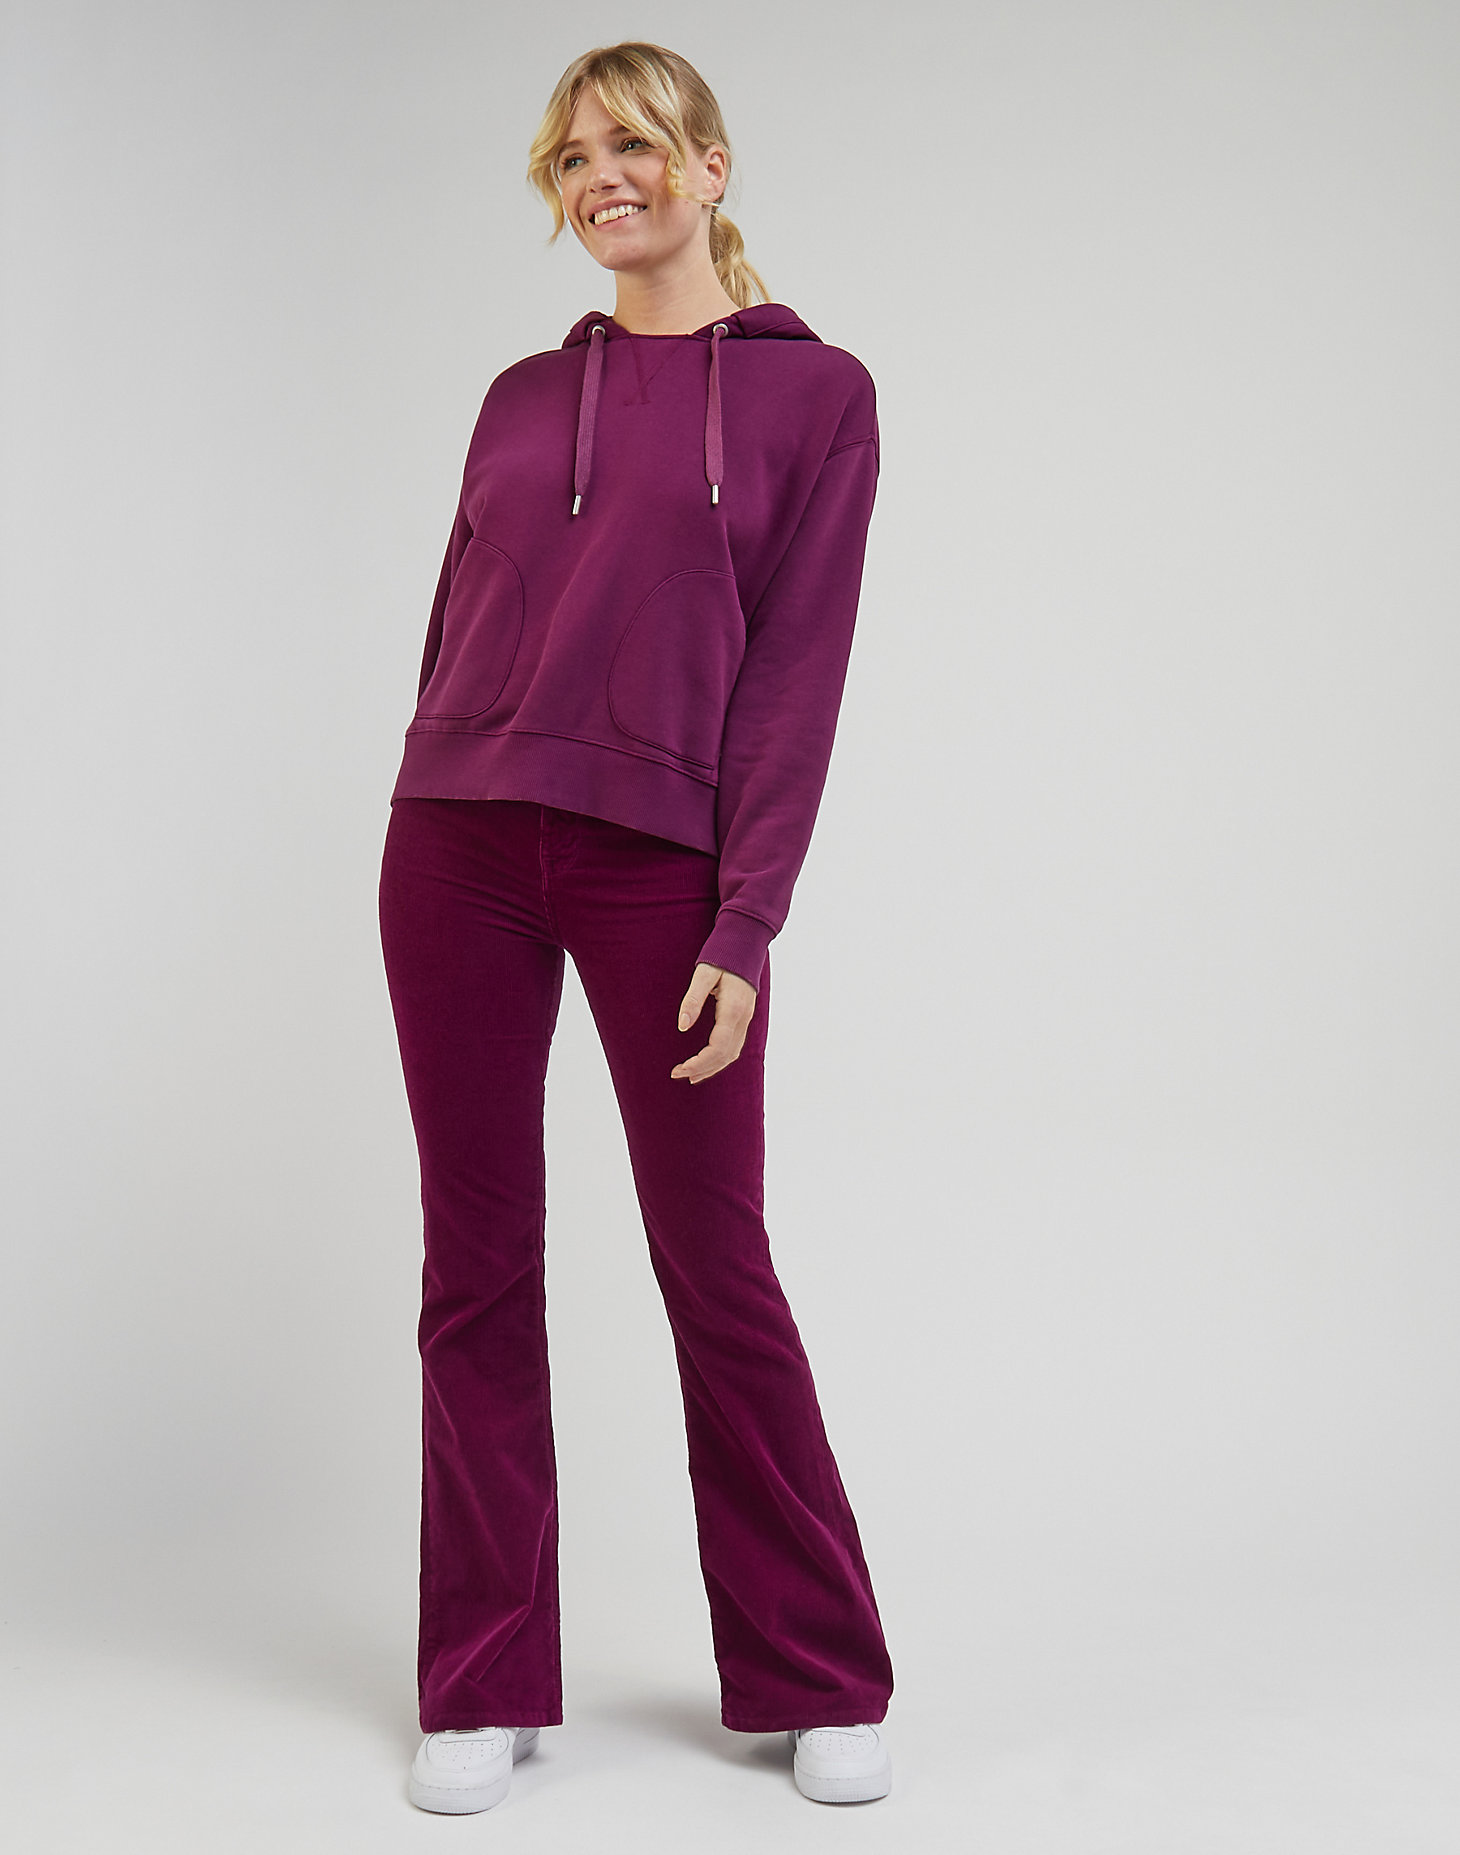 Relaxed Hoodie in Foxy Violet alternative view 2